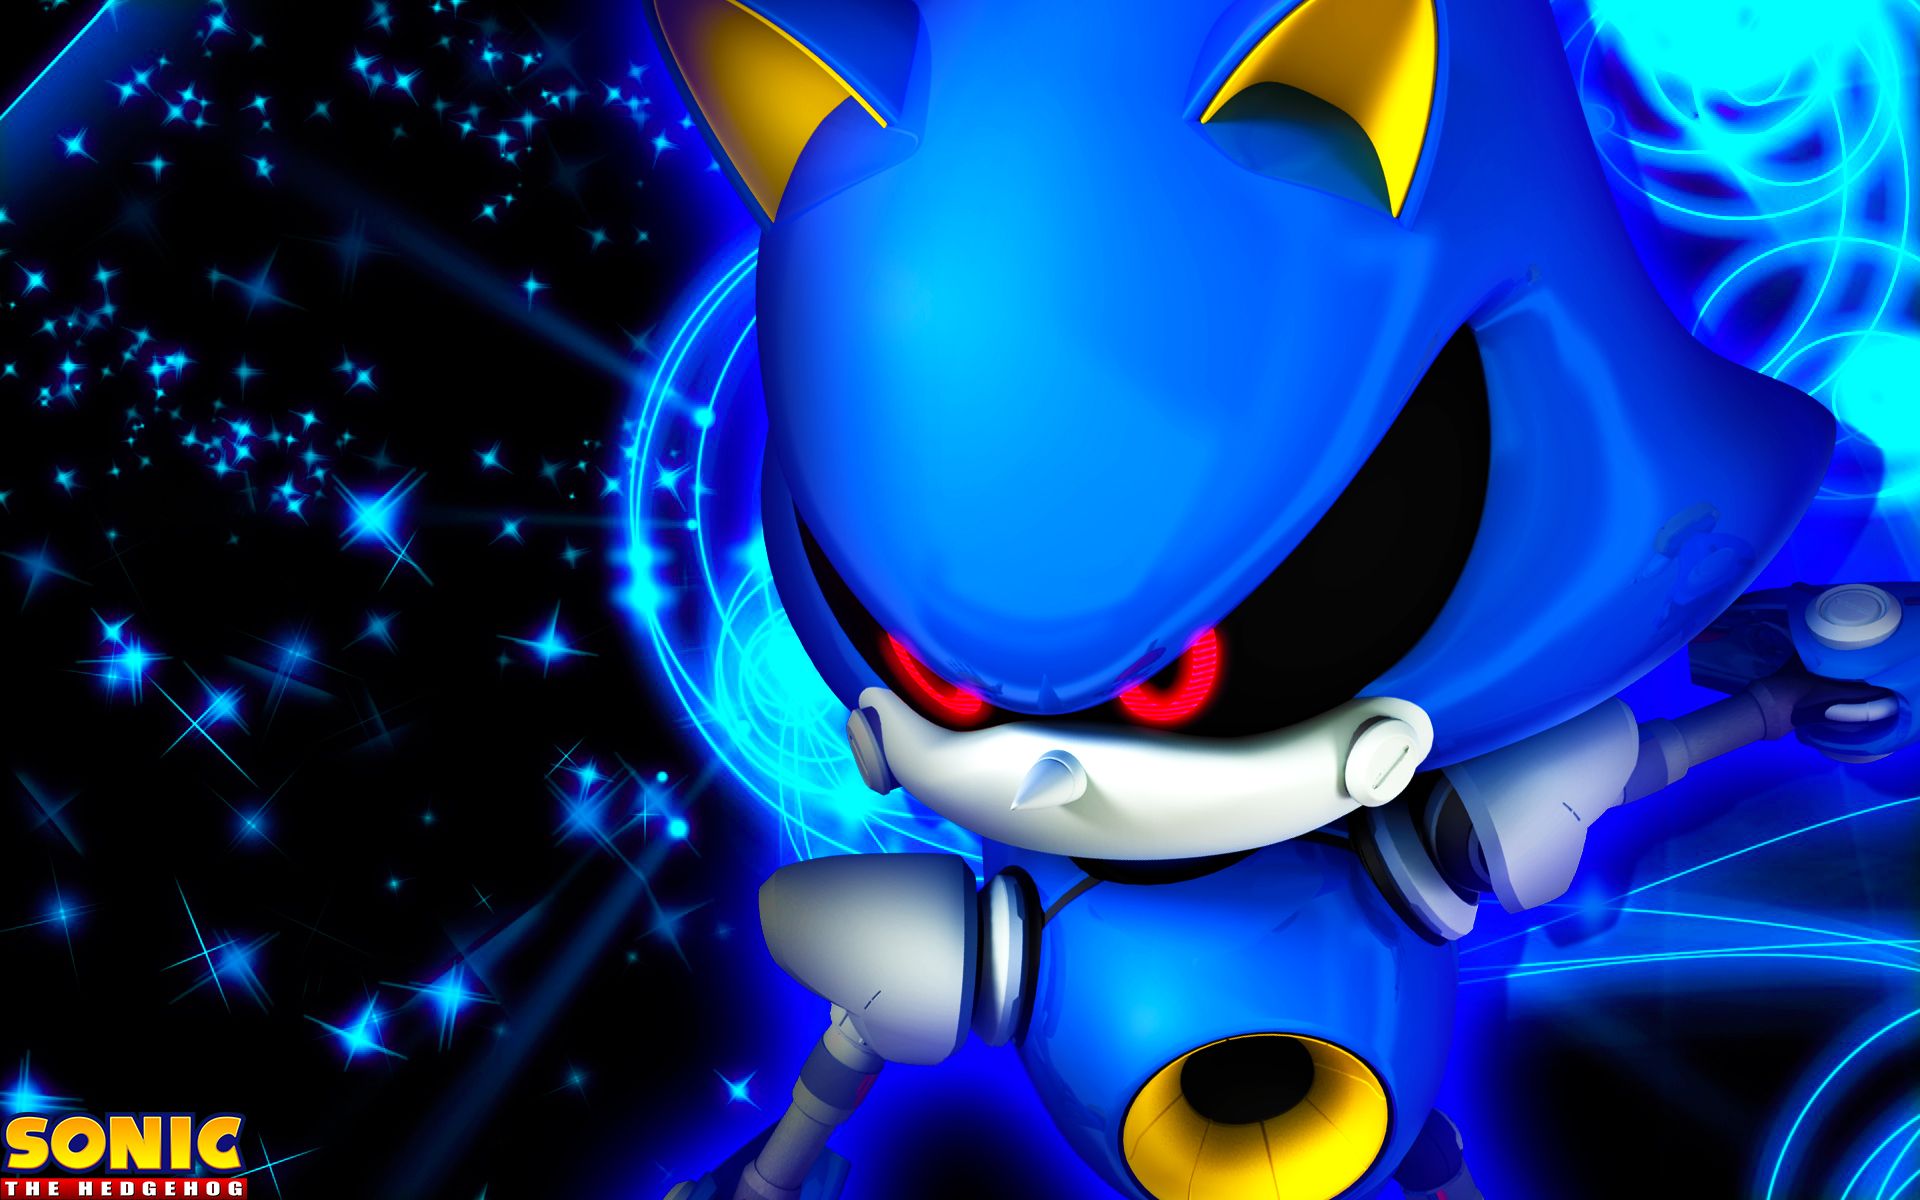 Epic Dark Sonic by JackTheKnight by JackTheKnight